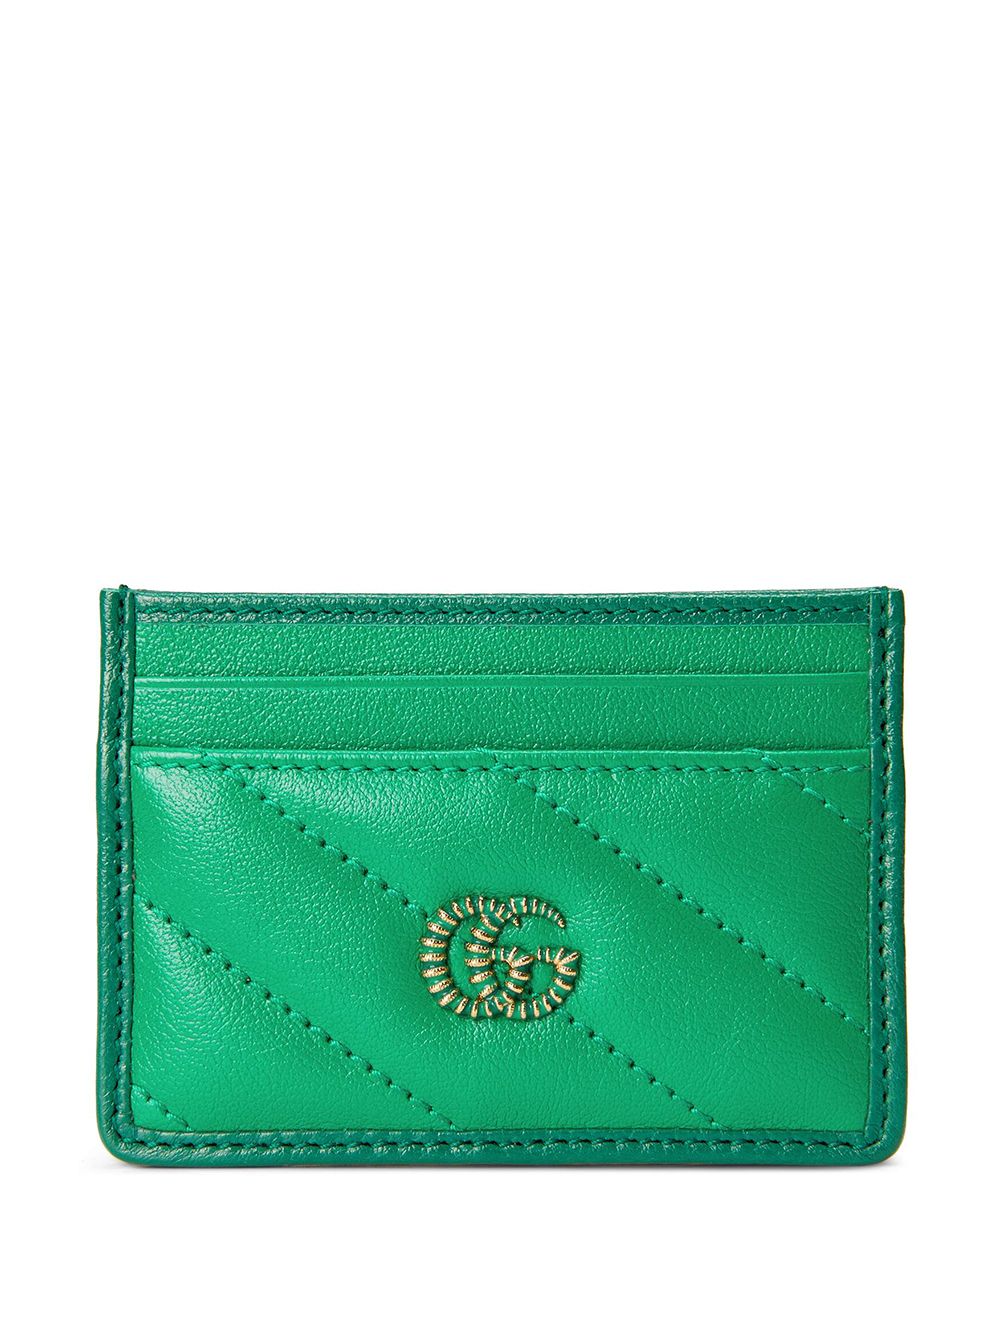 Gucci Gg Marmont Cardholder In Green